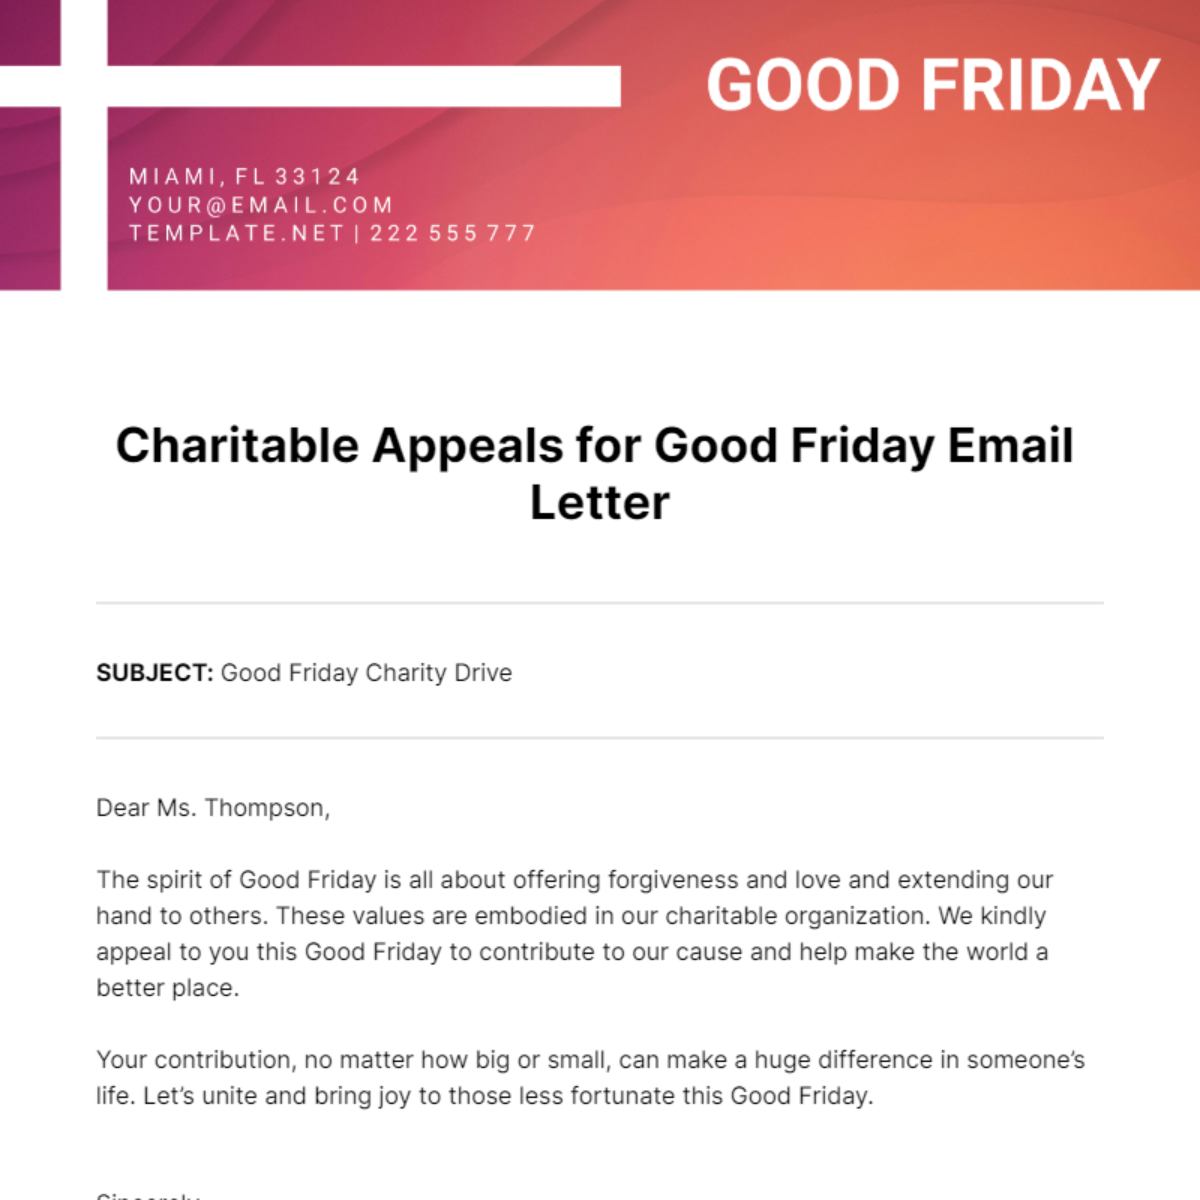 Charitable Appeals for Good Friday Email Letter Template